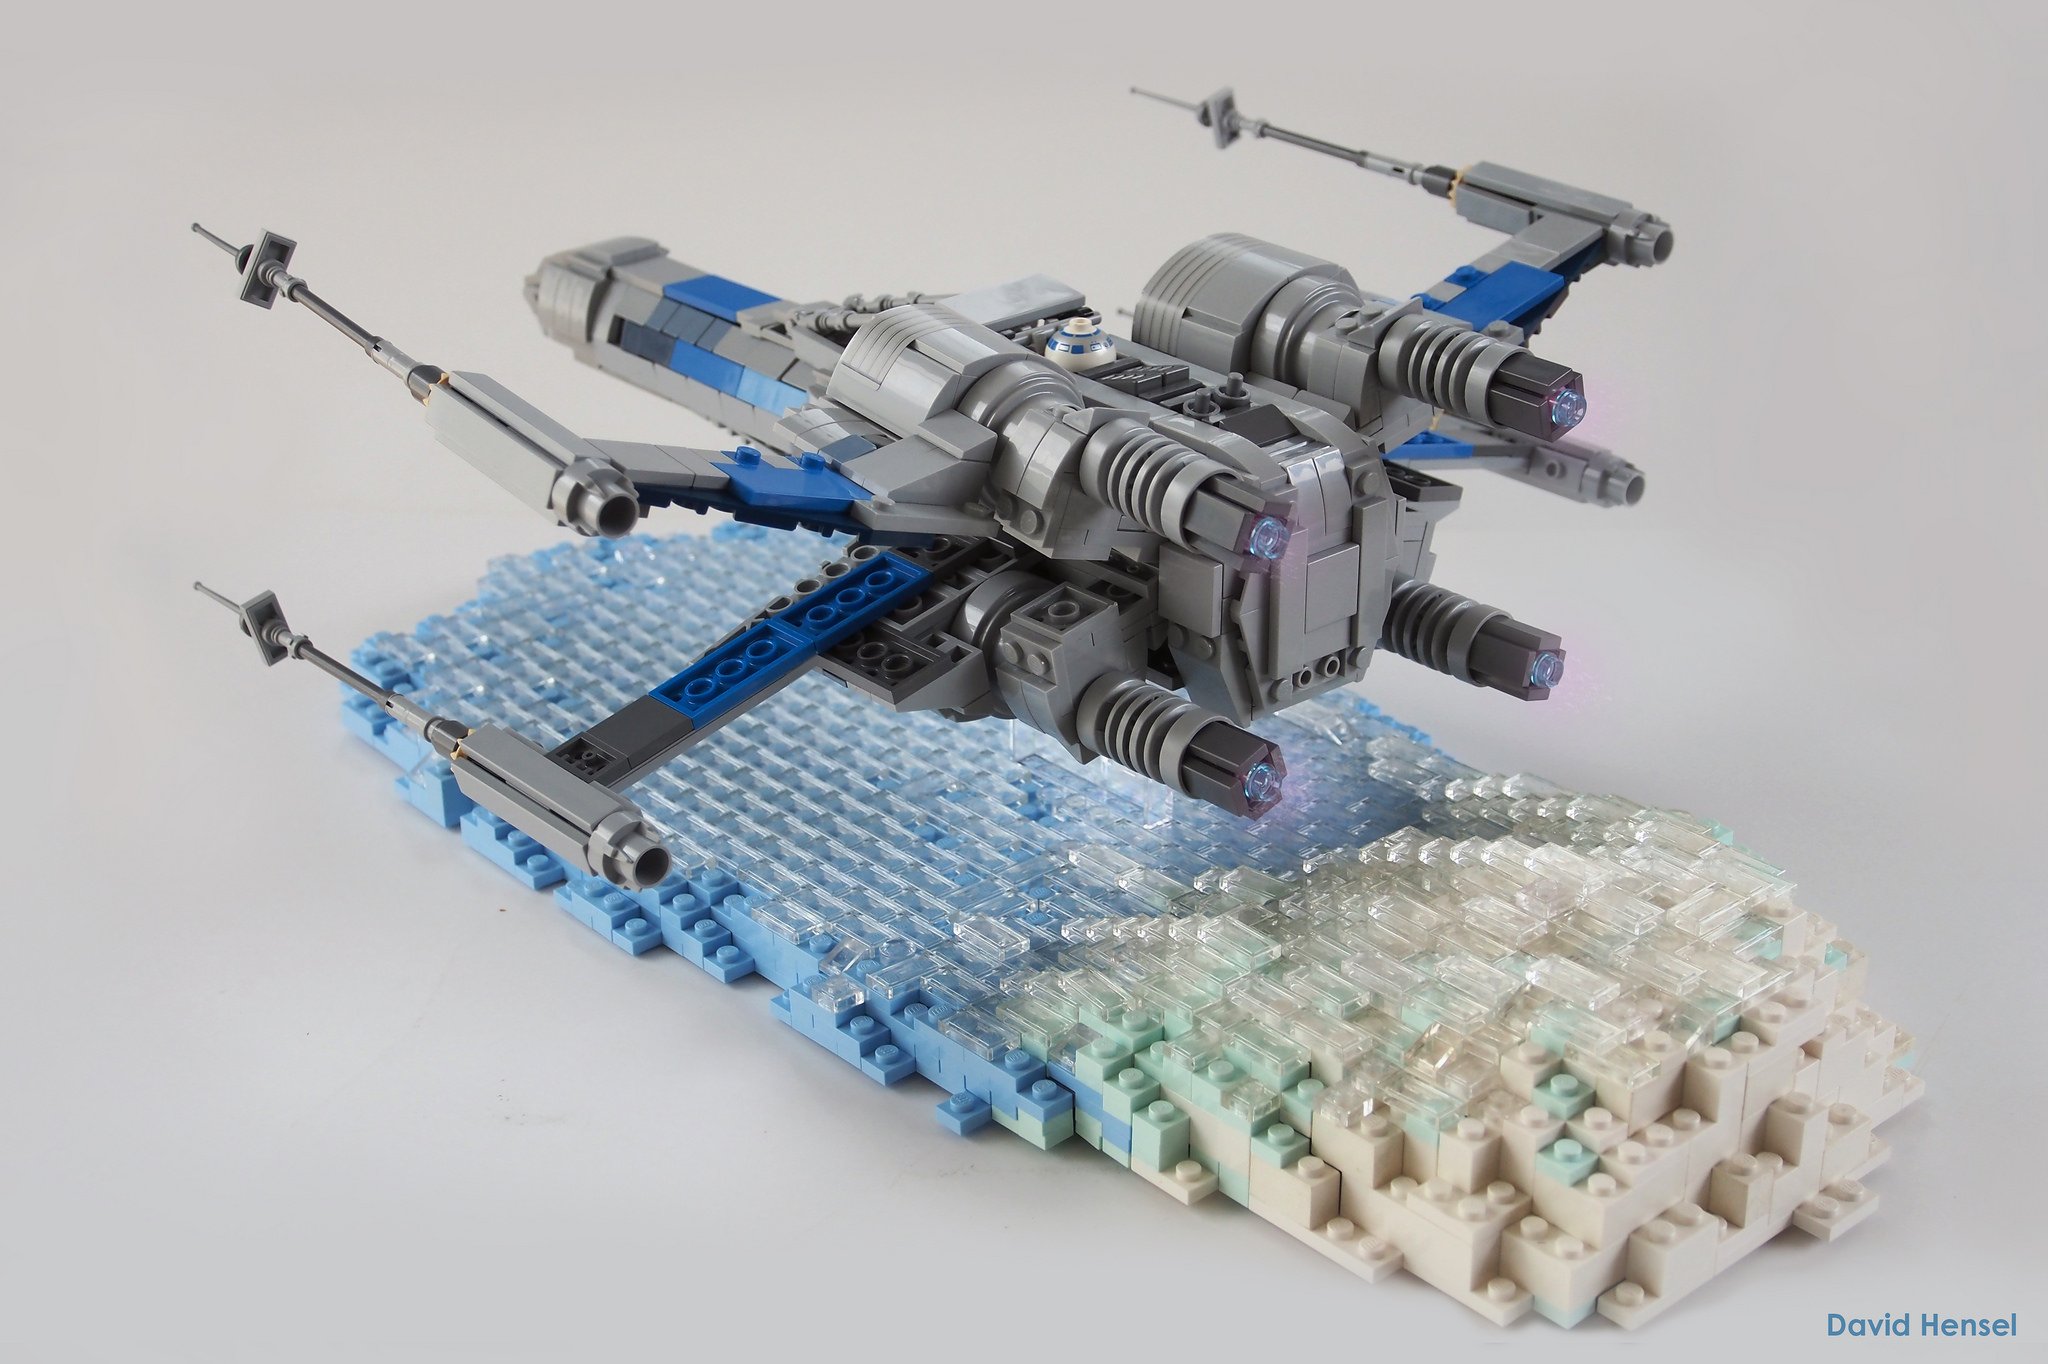 Giocovisione Lego T70 Xwing By Legonardo Davidy What Is Better Moc Or Official More T Co Kqagebfdlo Theforceawakens T Co Yorudgpd2q